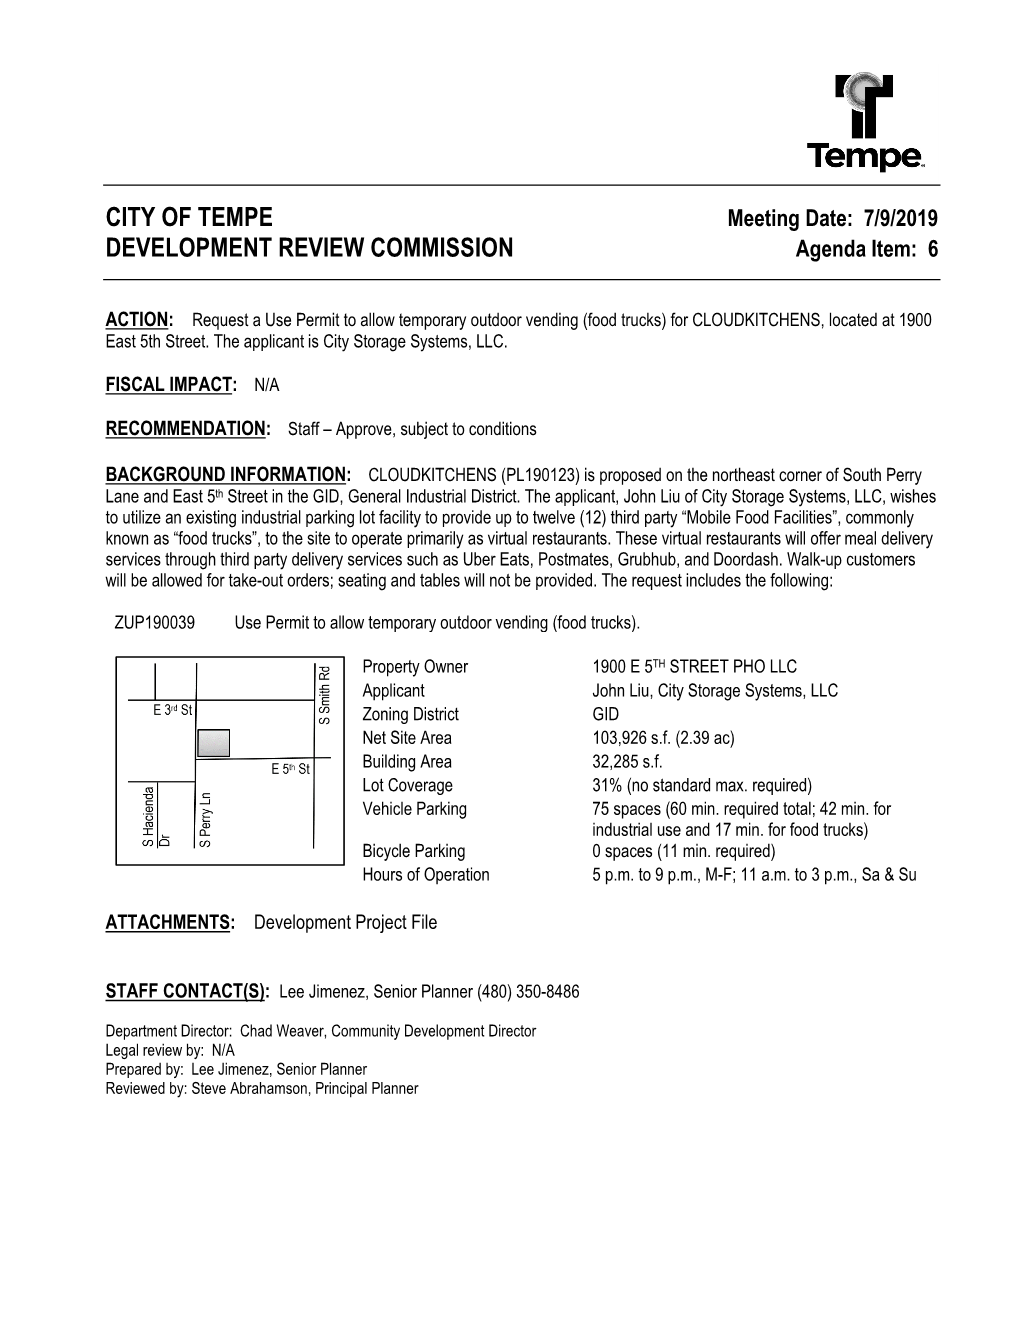 City of Tempe Development Review Commission